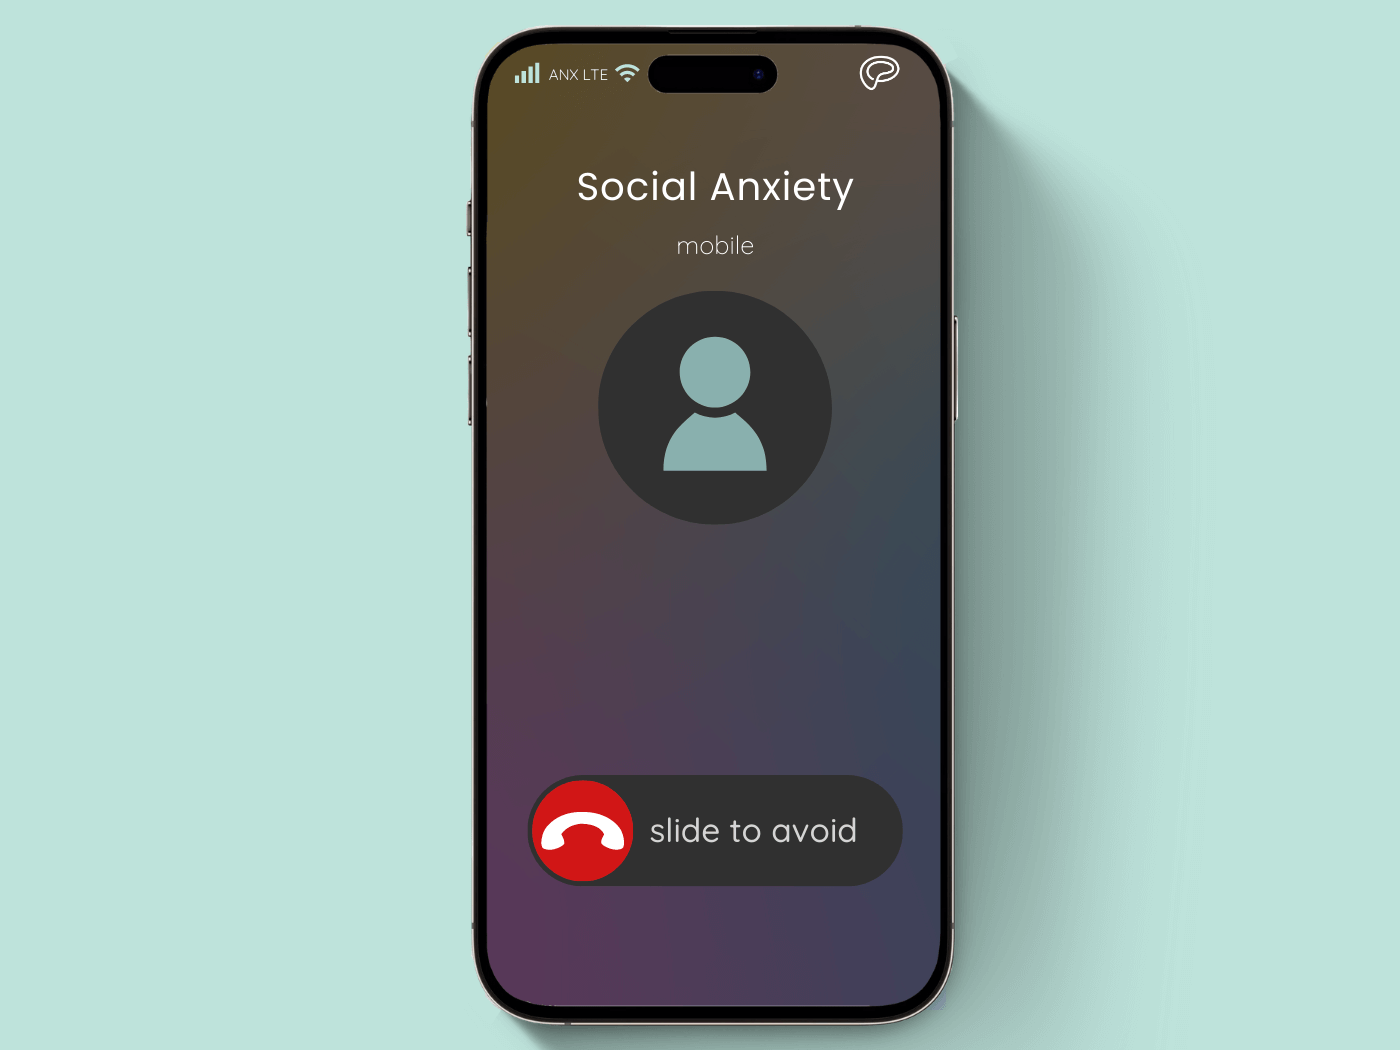 Avoiding incoming phone call on an iphone. Phone shows social anxiety is calling from mobile and the swipe option is Avoid instead of Answer